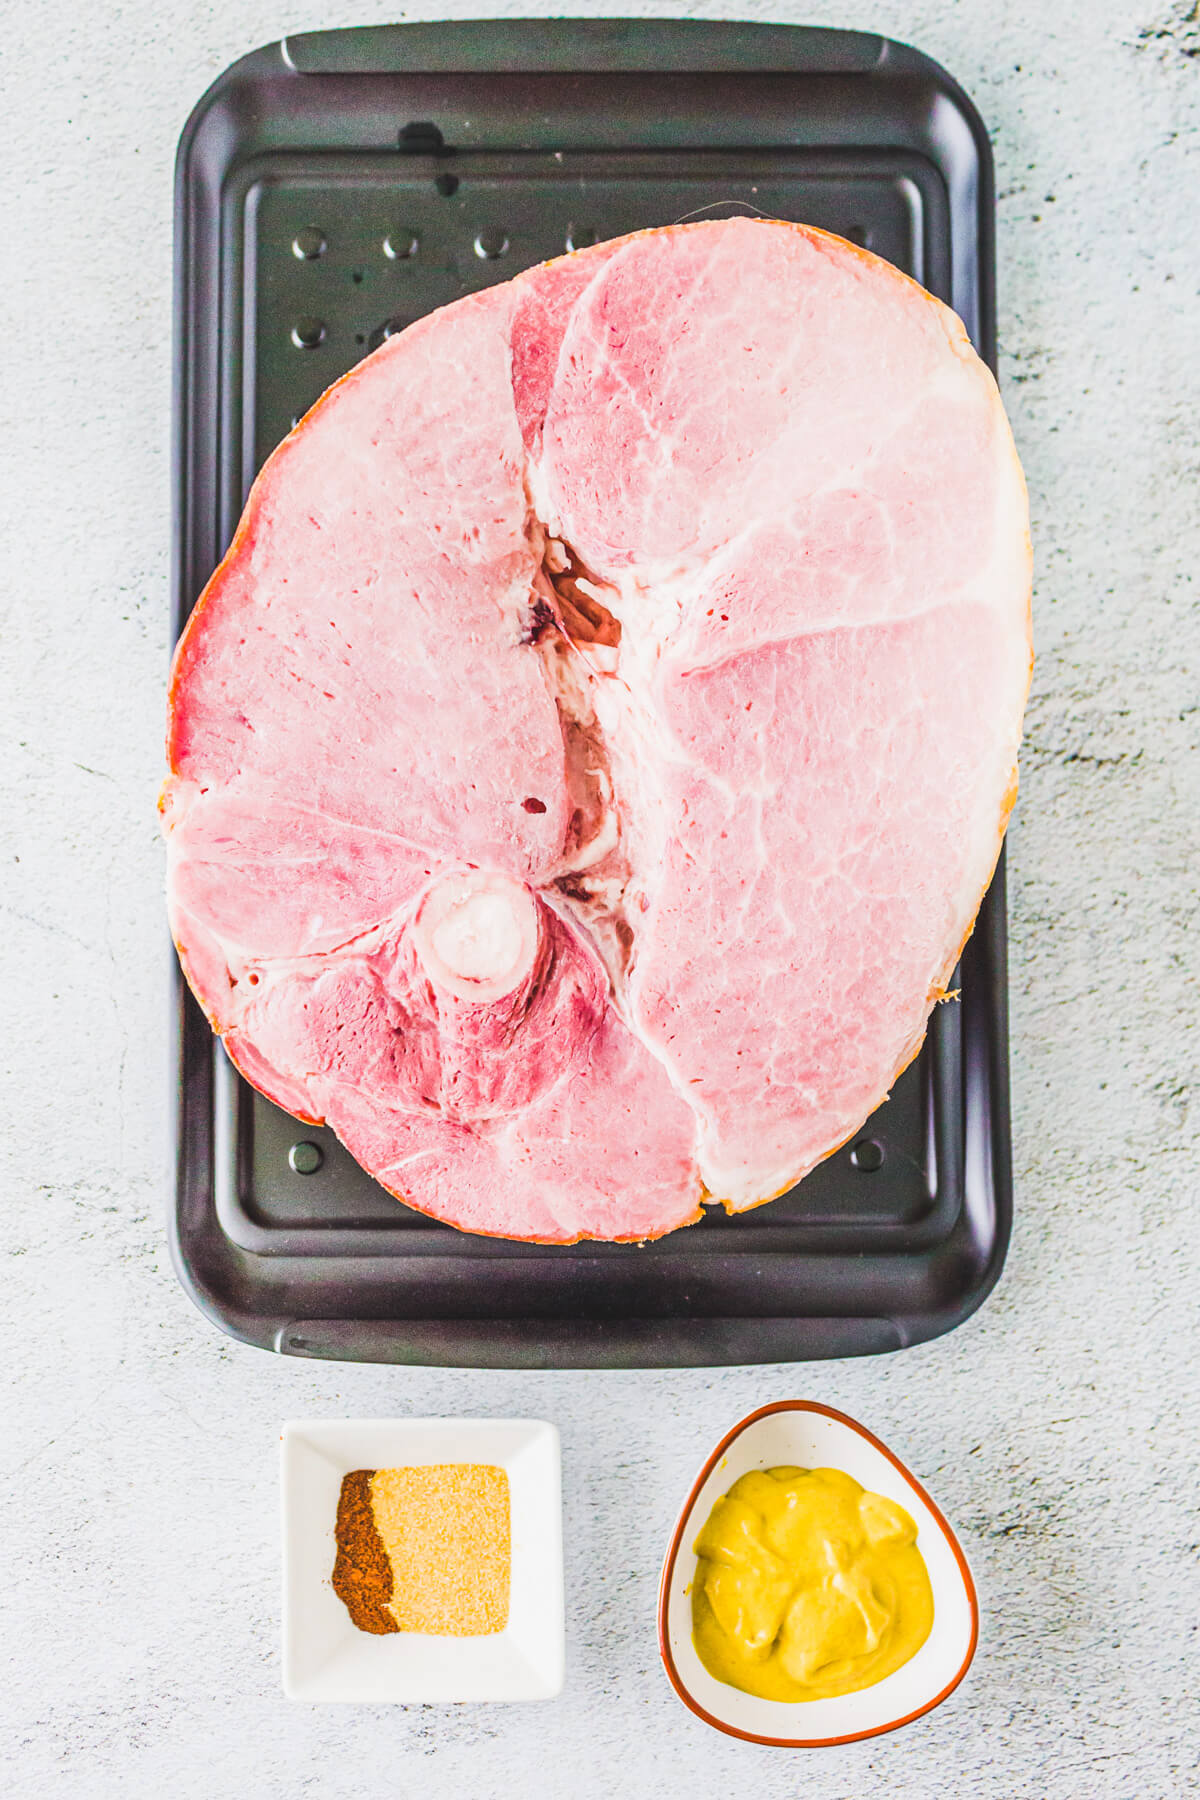 Ingredients required to make a Double Smoked Ham and glaze.